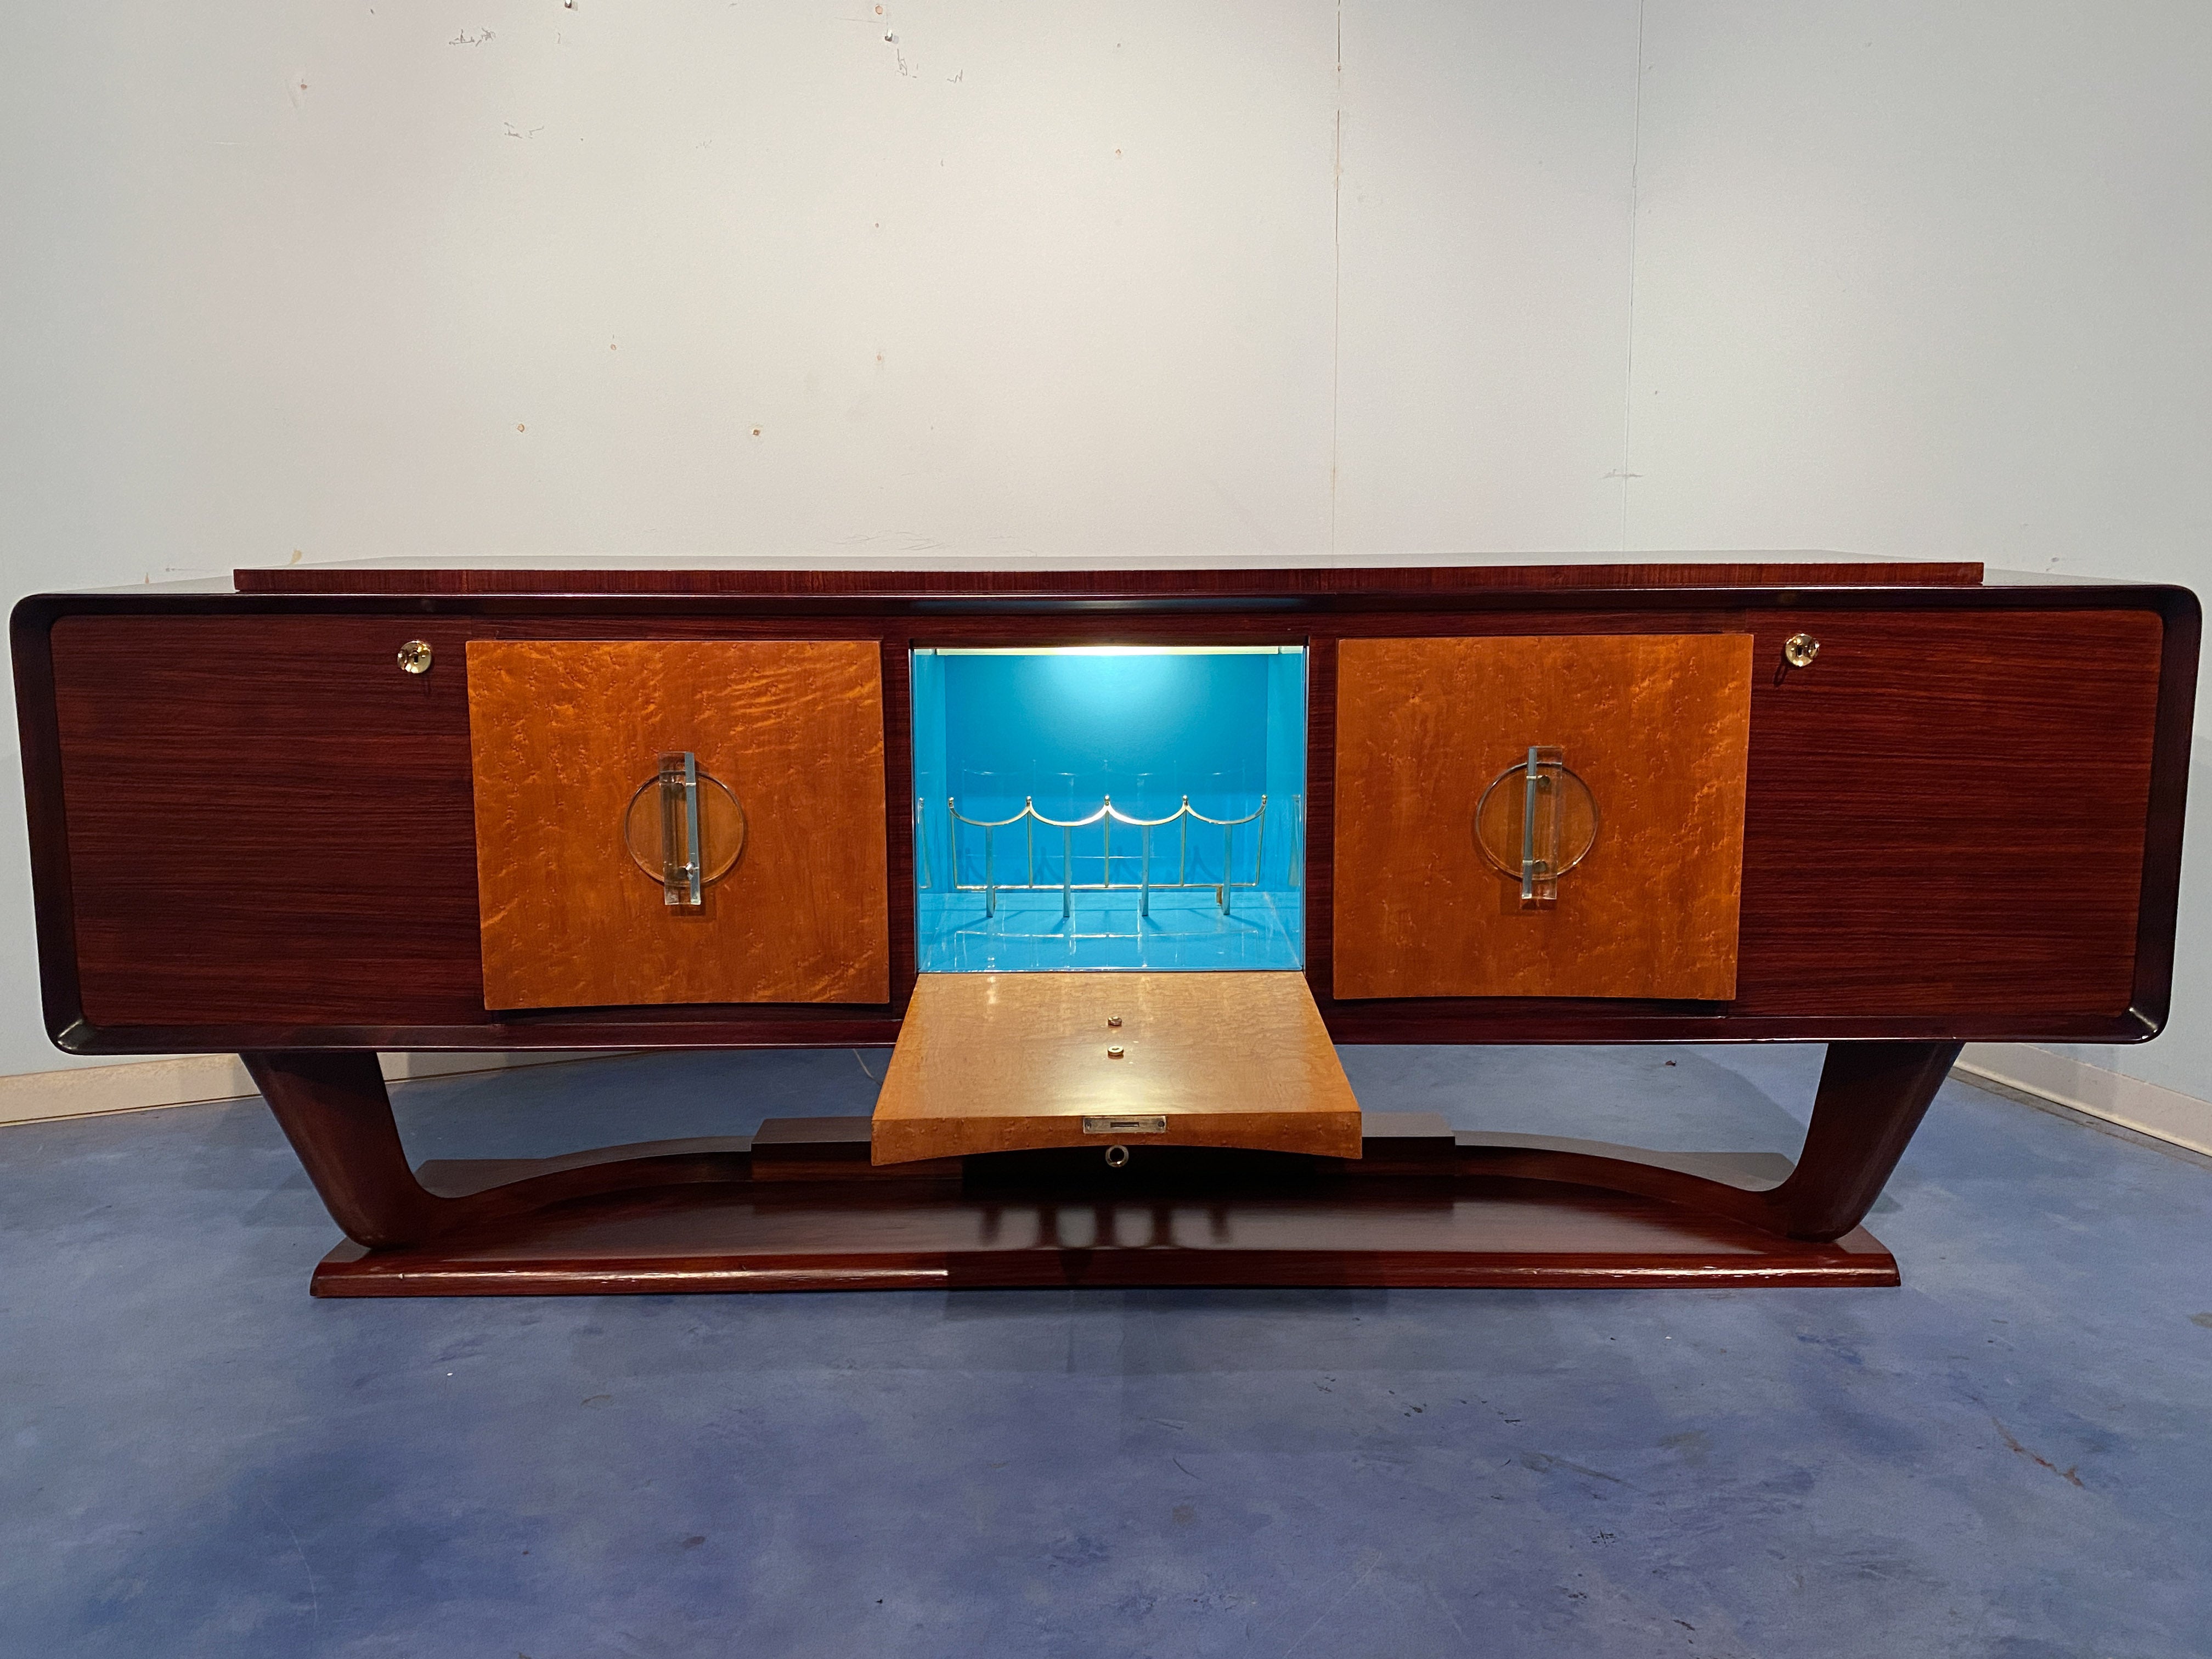 Italian Art Deco Sideboard with Bar Cabinet Attributed to Osvaldo Borsani, 1940s For Sale 2